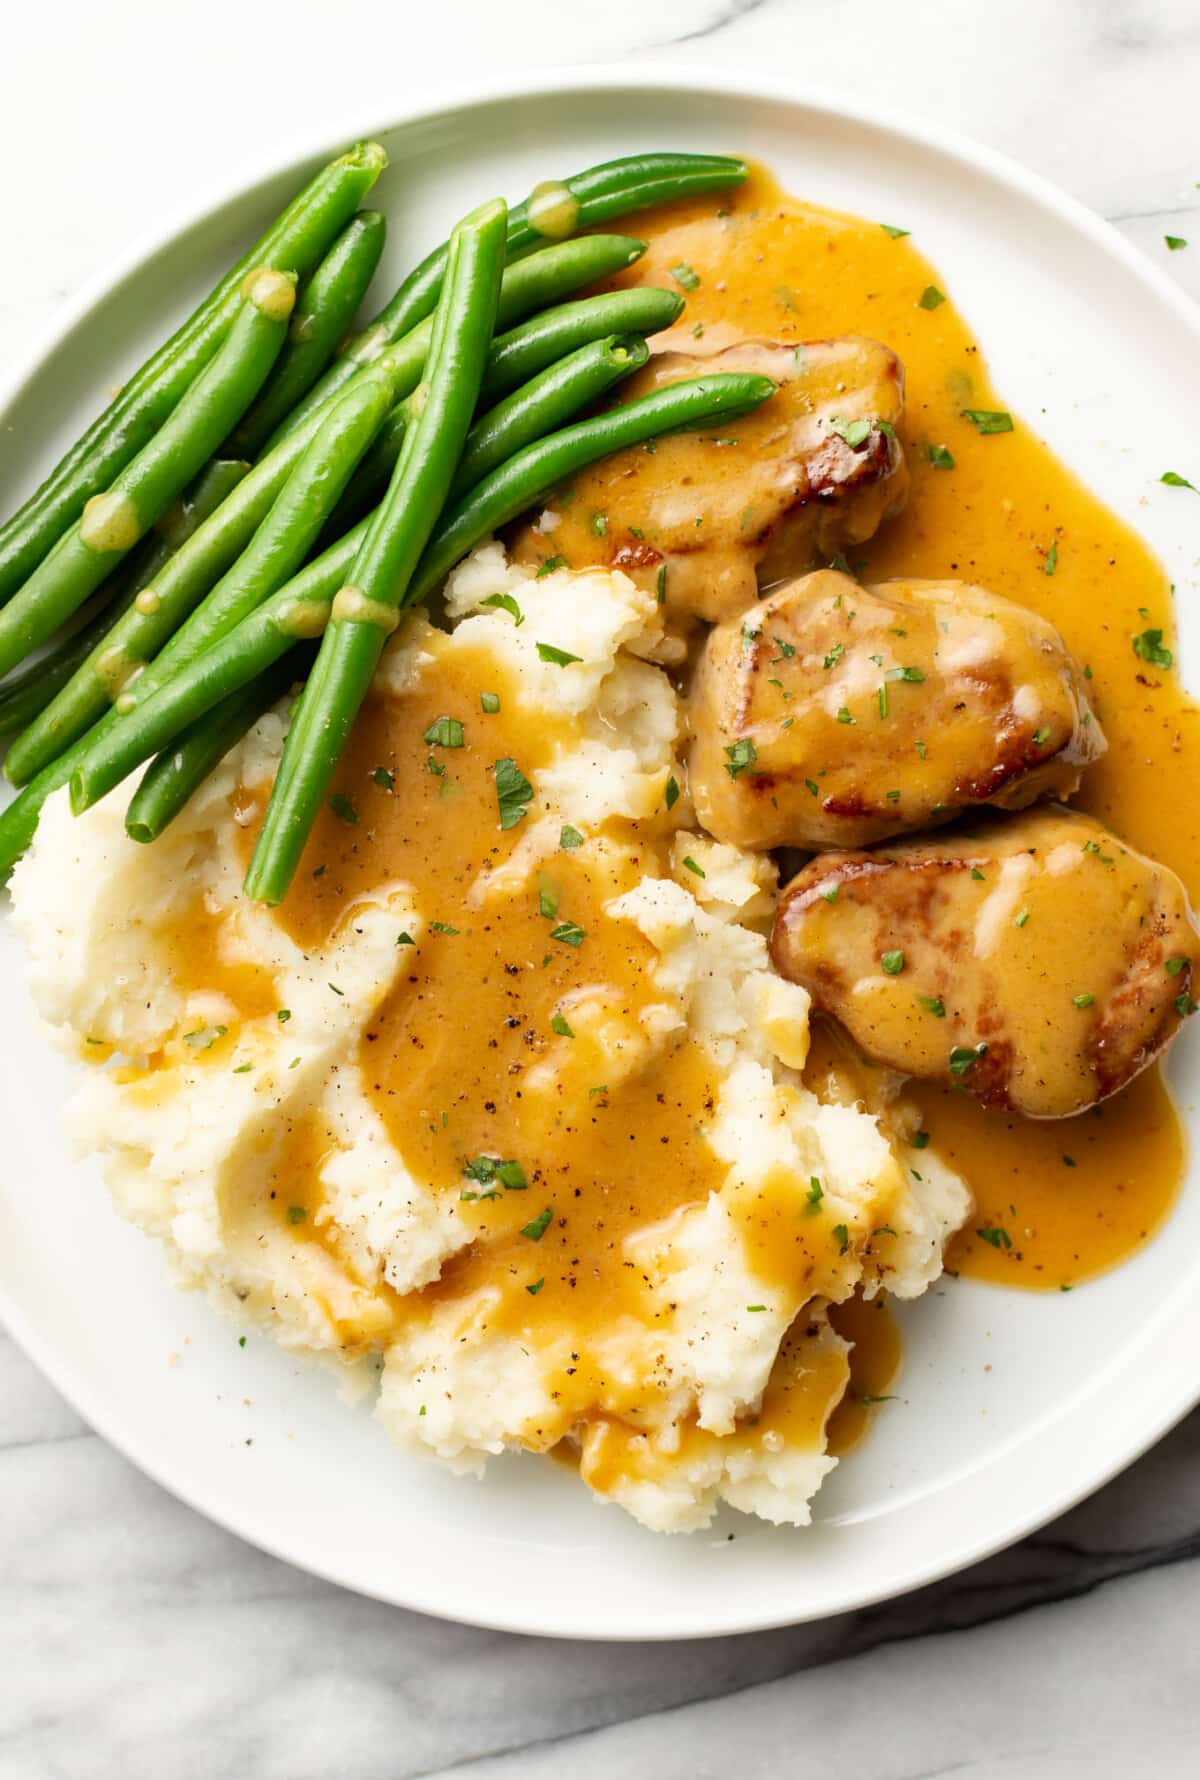 a plate with honey mustard pork tenderloin, green beans, and mashed potatoes